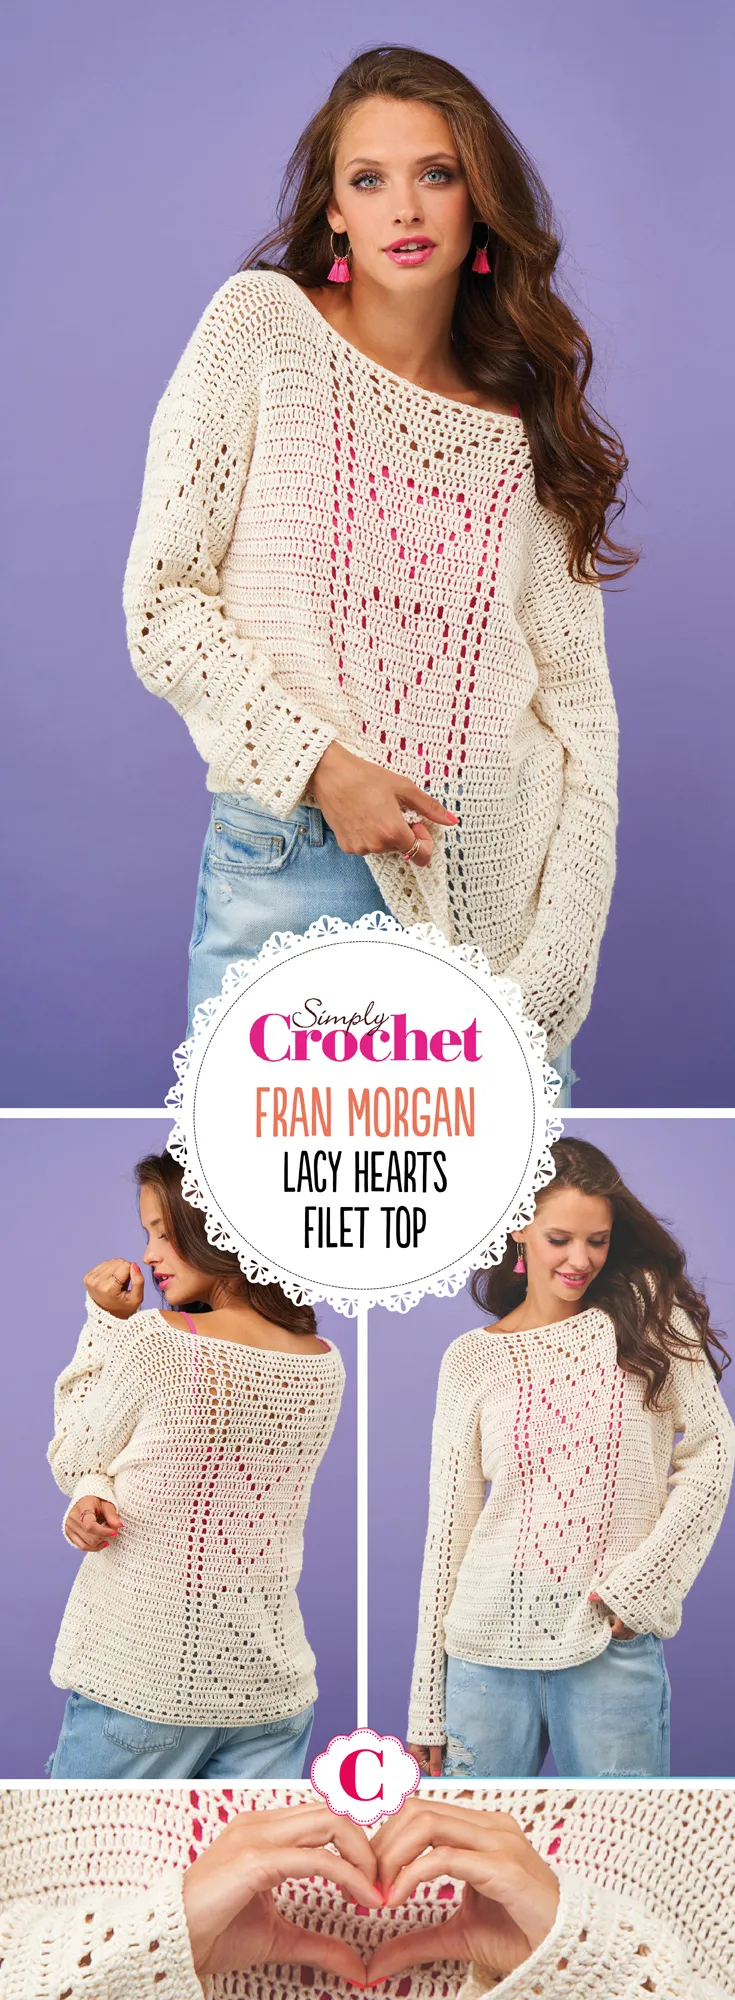 Simply_Crochet_issue75_Heart_Sweater_pin